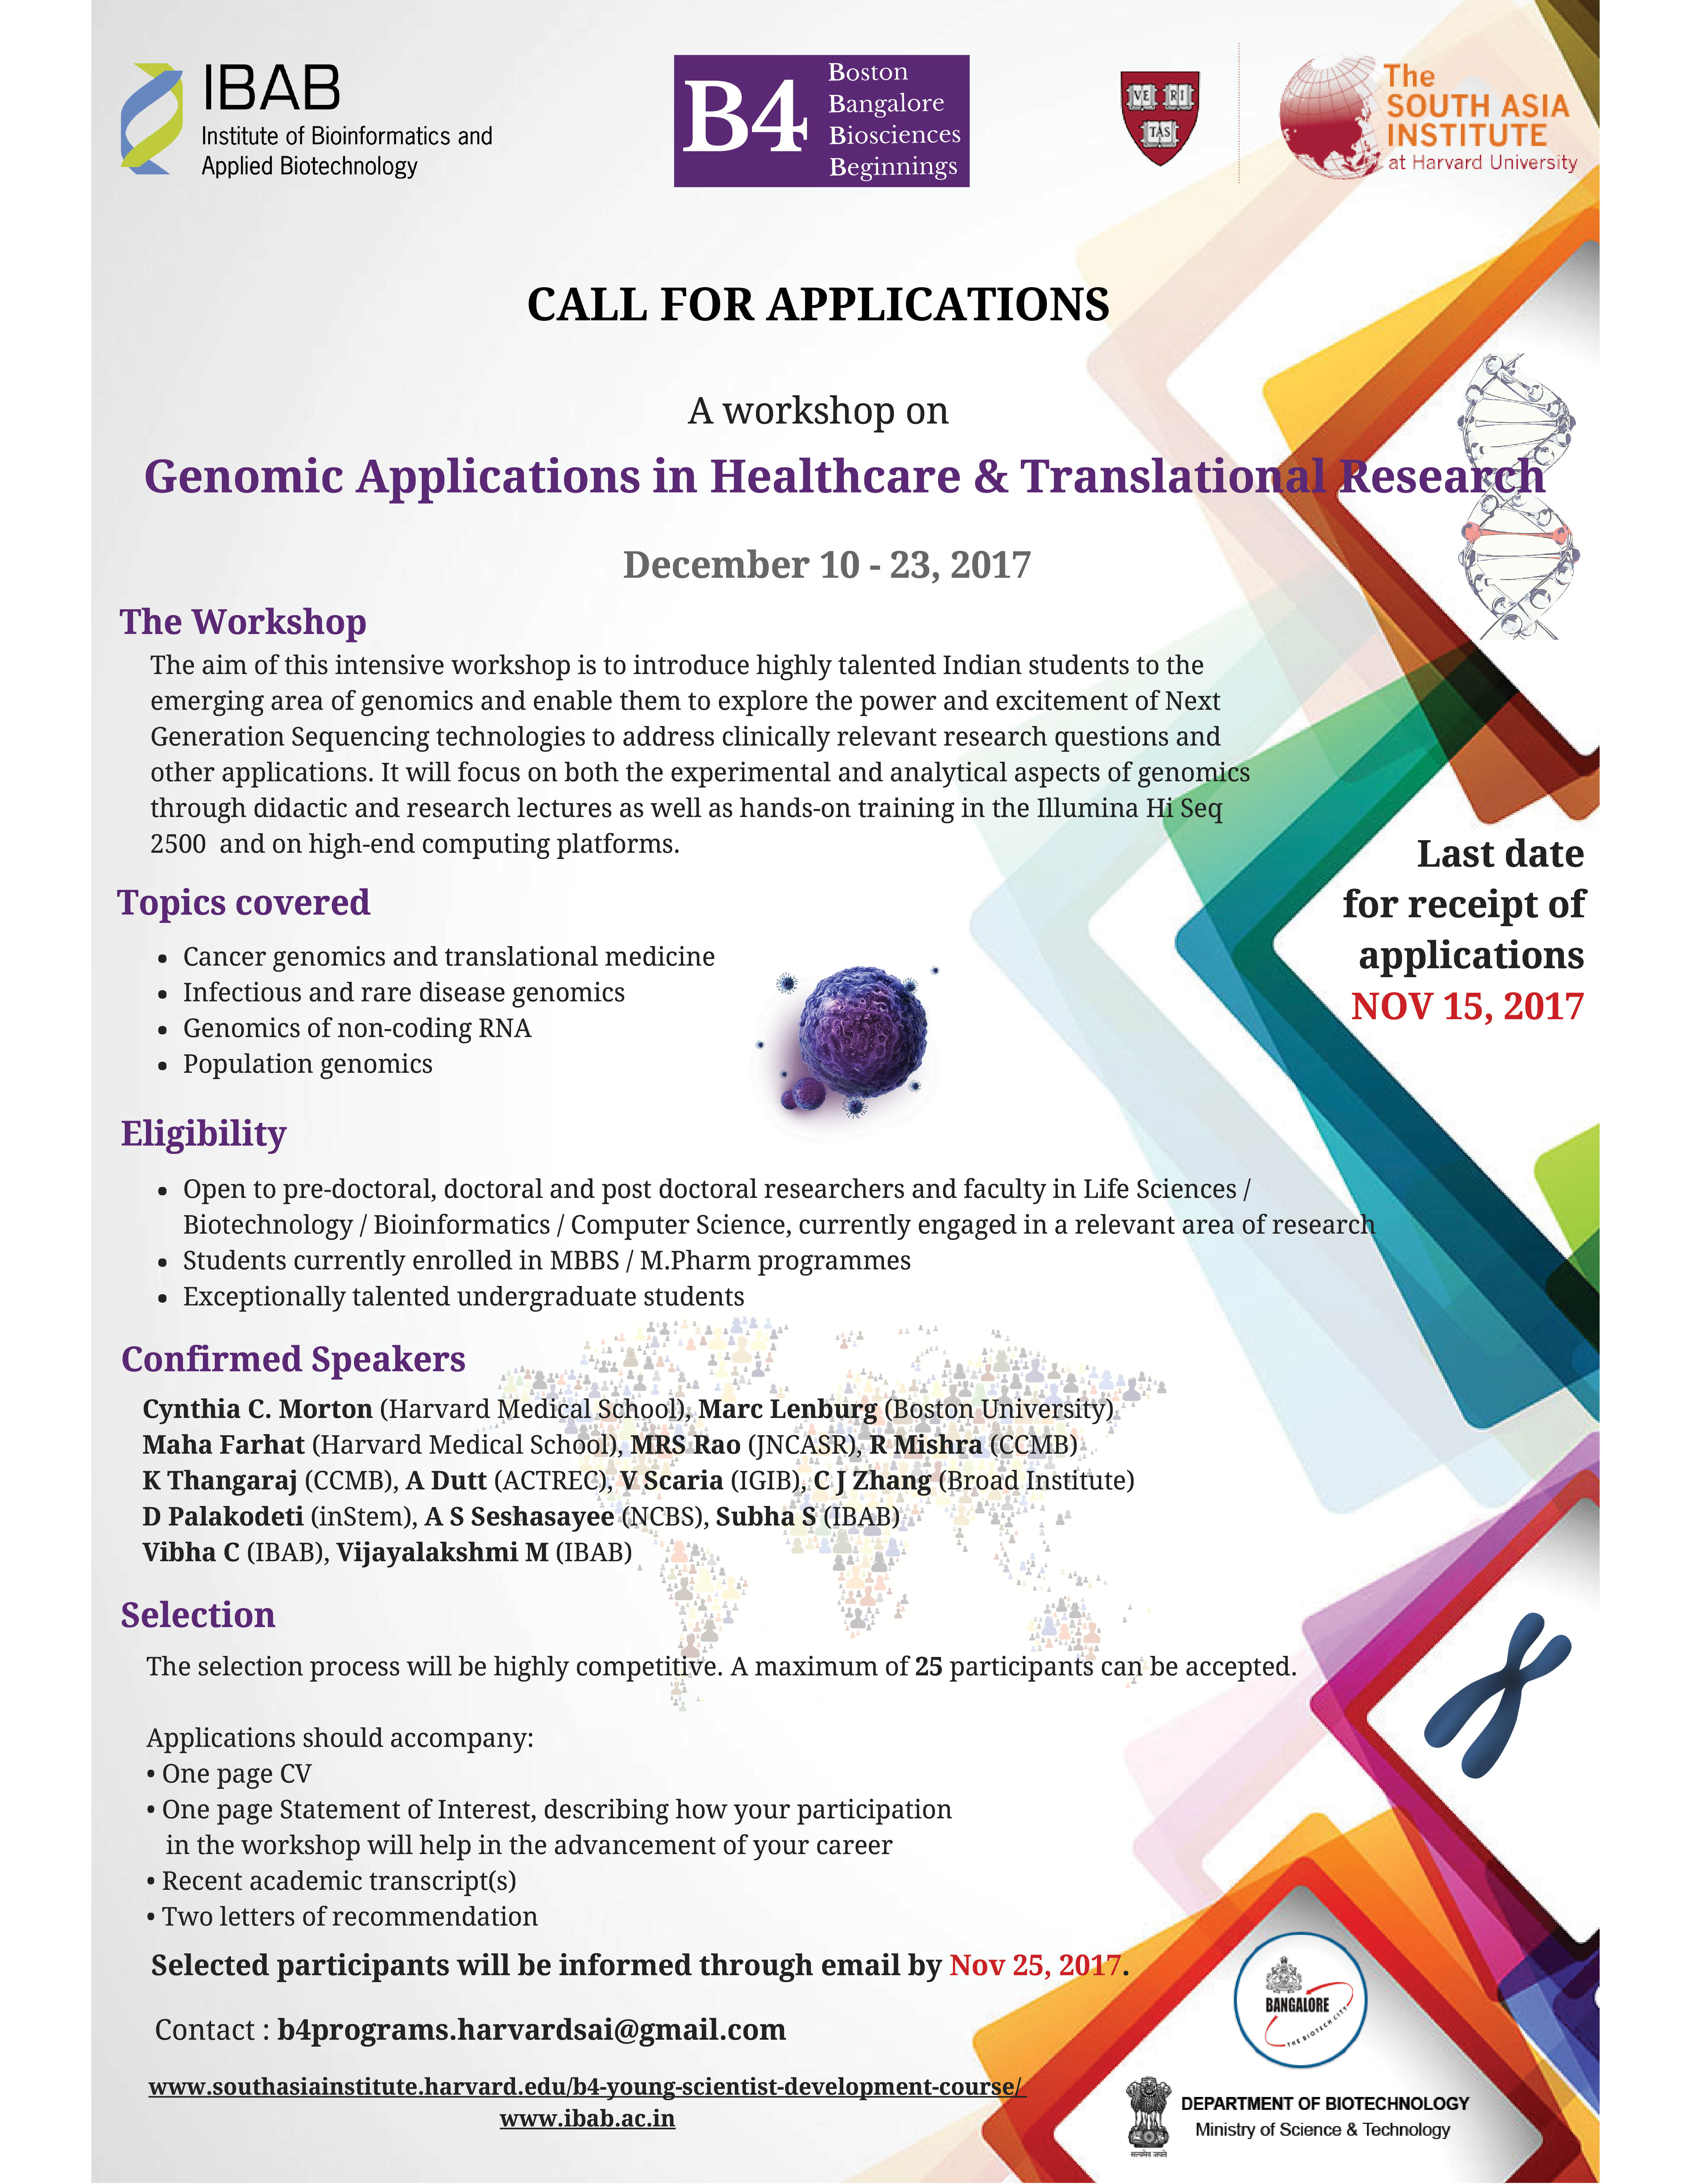 Call for applications: A Workshop on Genomic Applications in Healthcare & Translational Research